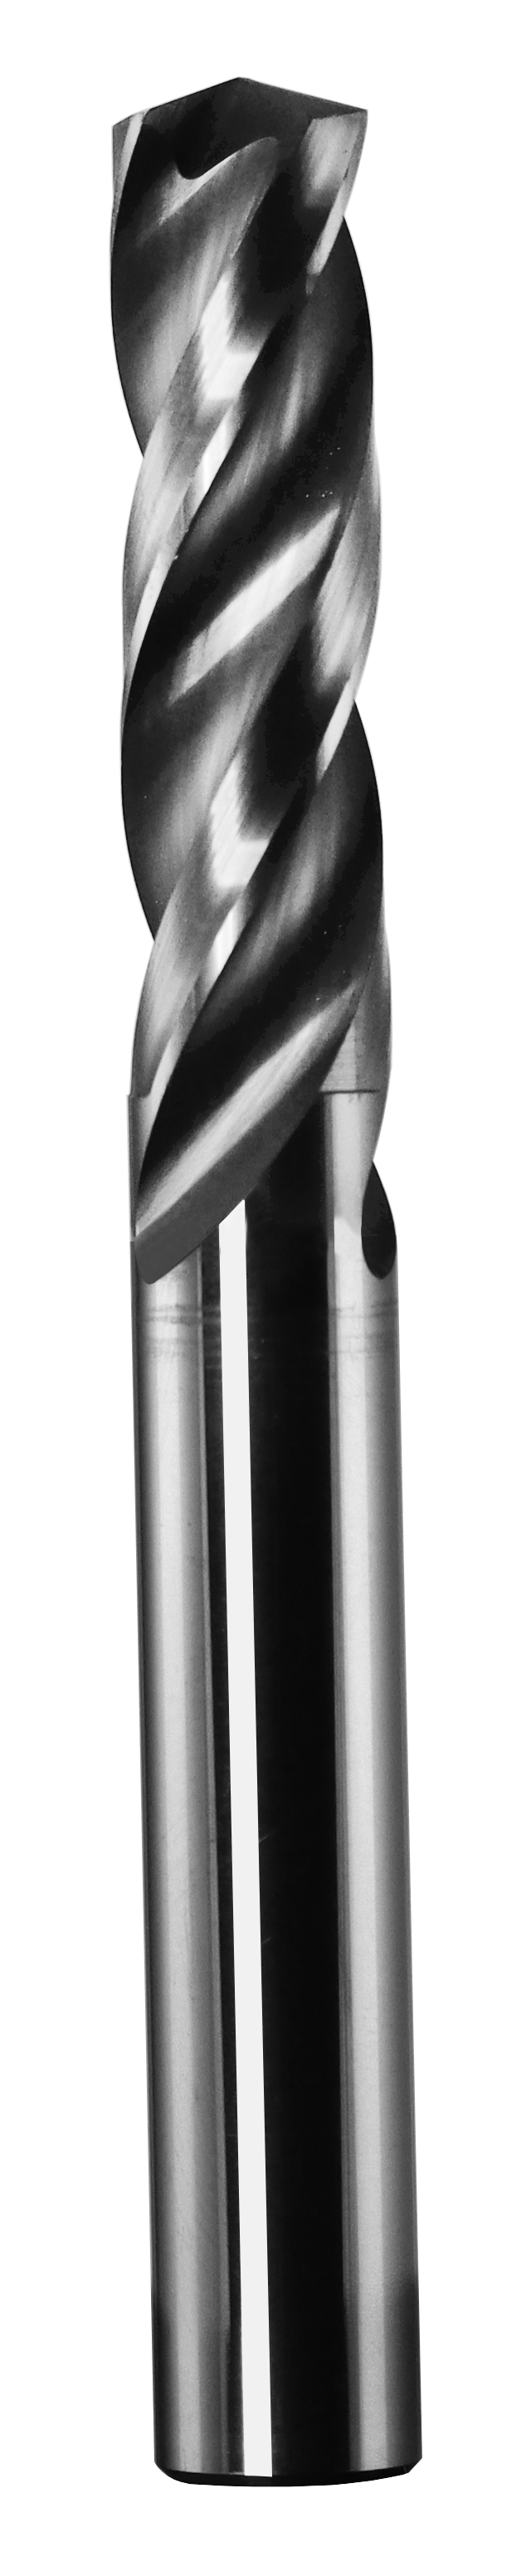 10.10mm Dia, 150 Degree Point, Solid Carbide Drill - 63088